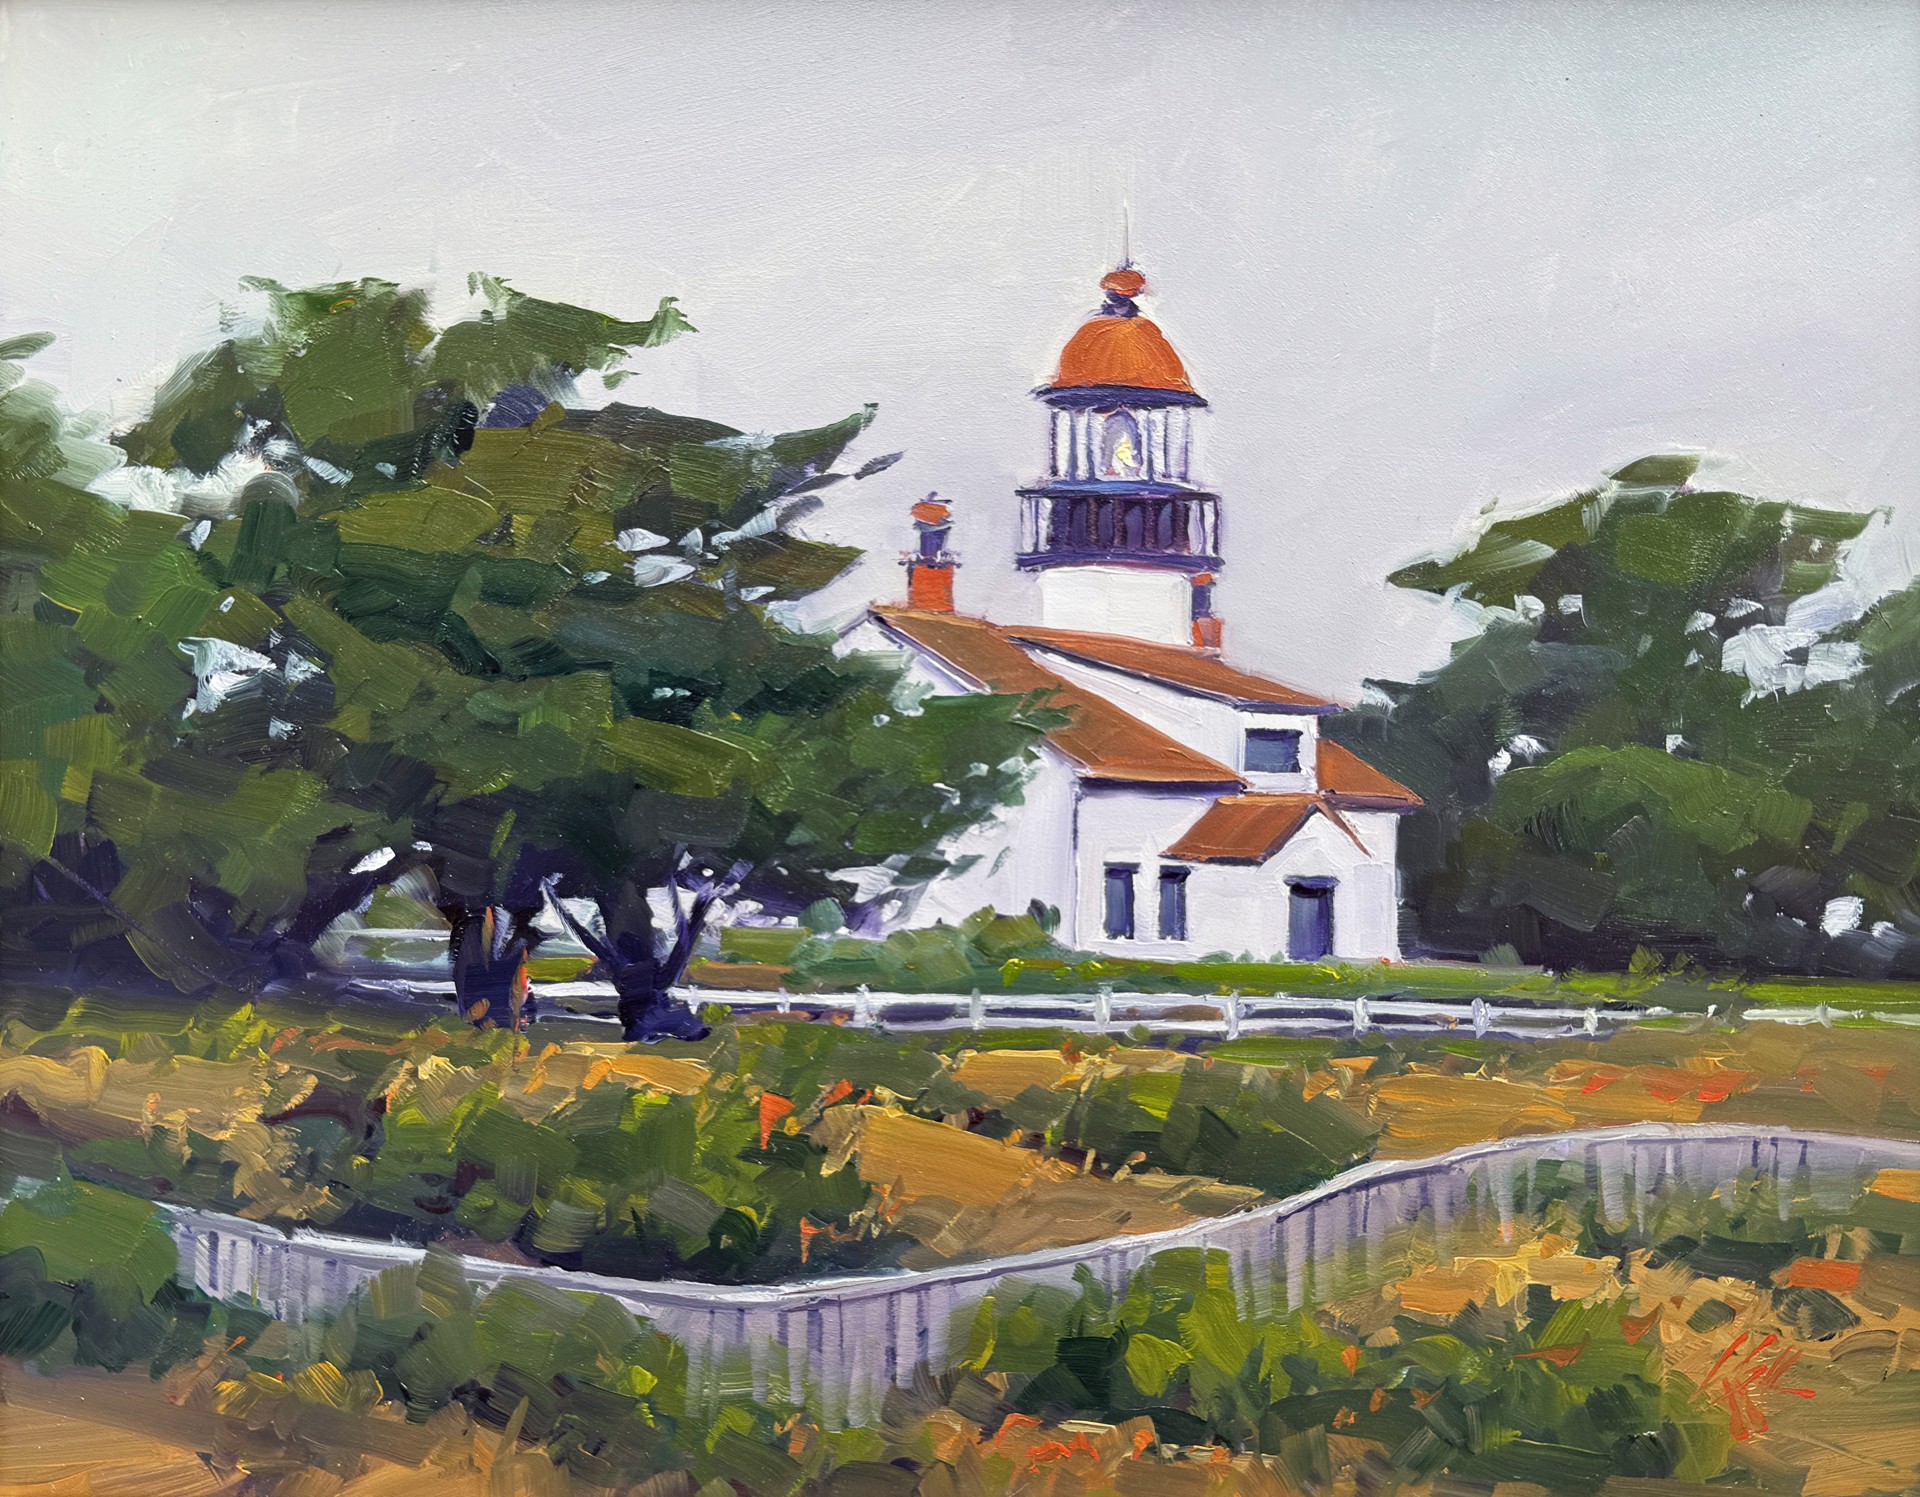 Gray Day Lighthouse by Gregory Stocks